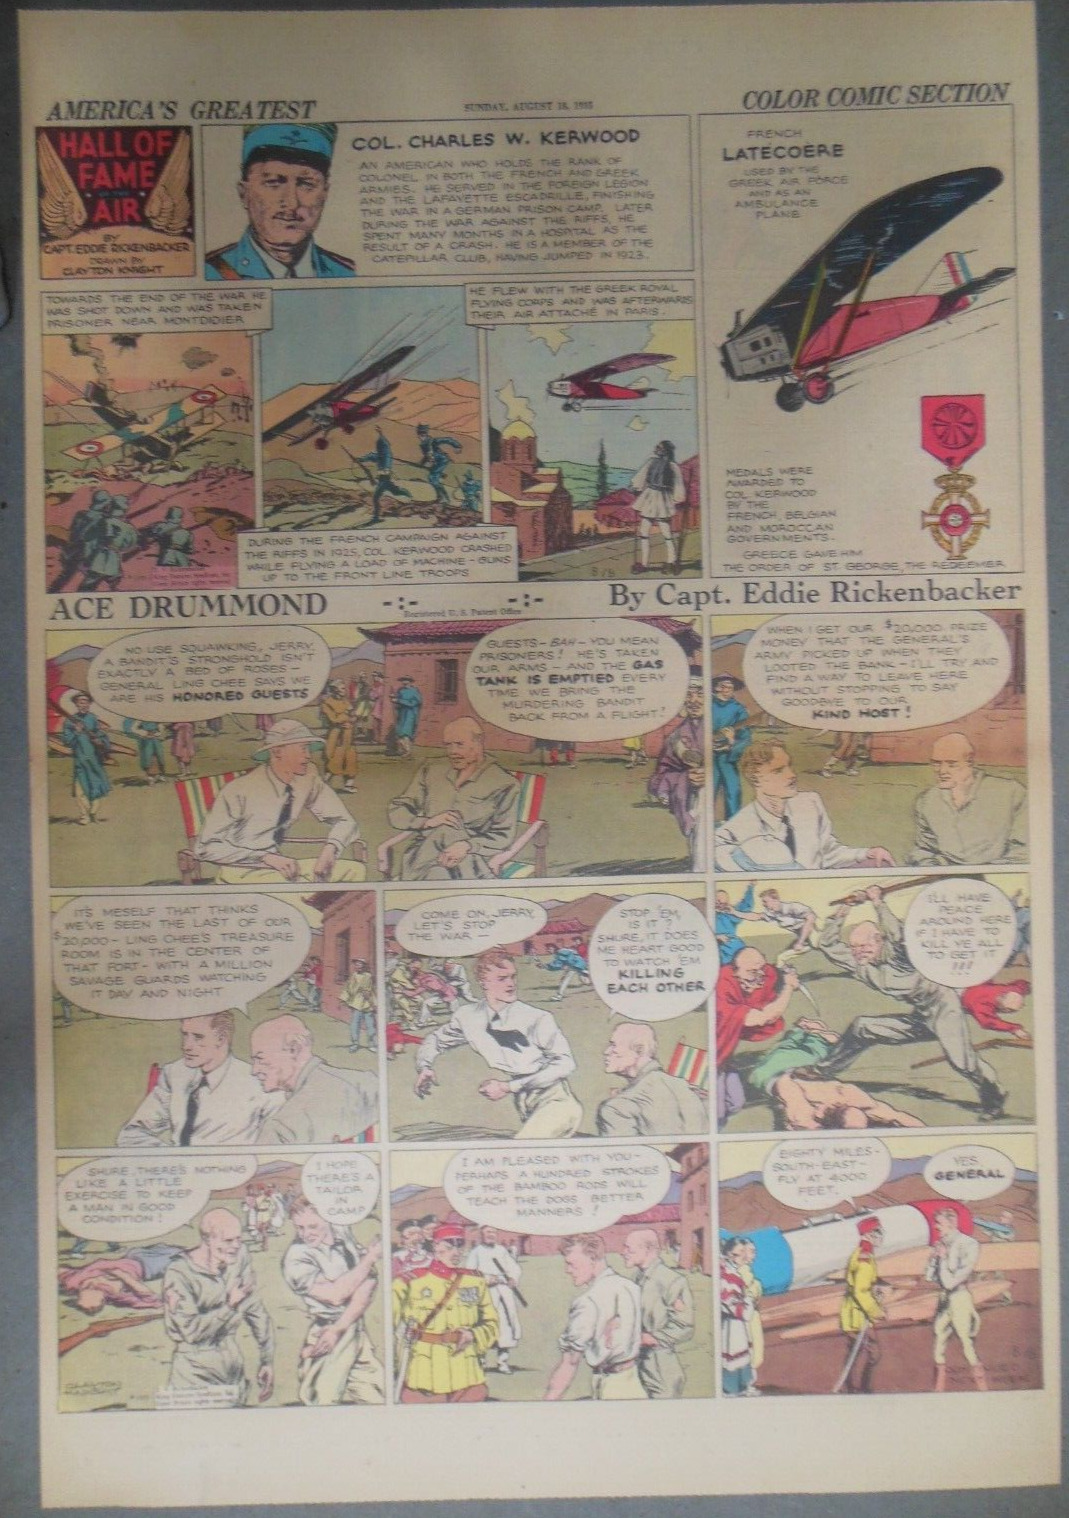 Ace Drummond Sunday by Capt Eddie Rickenbacker from 8/18/1935 Large Full Page 